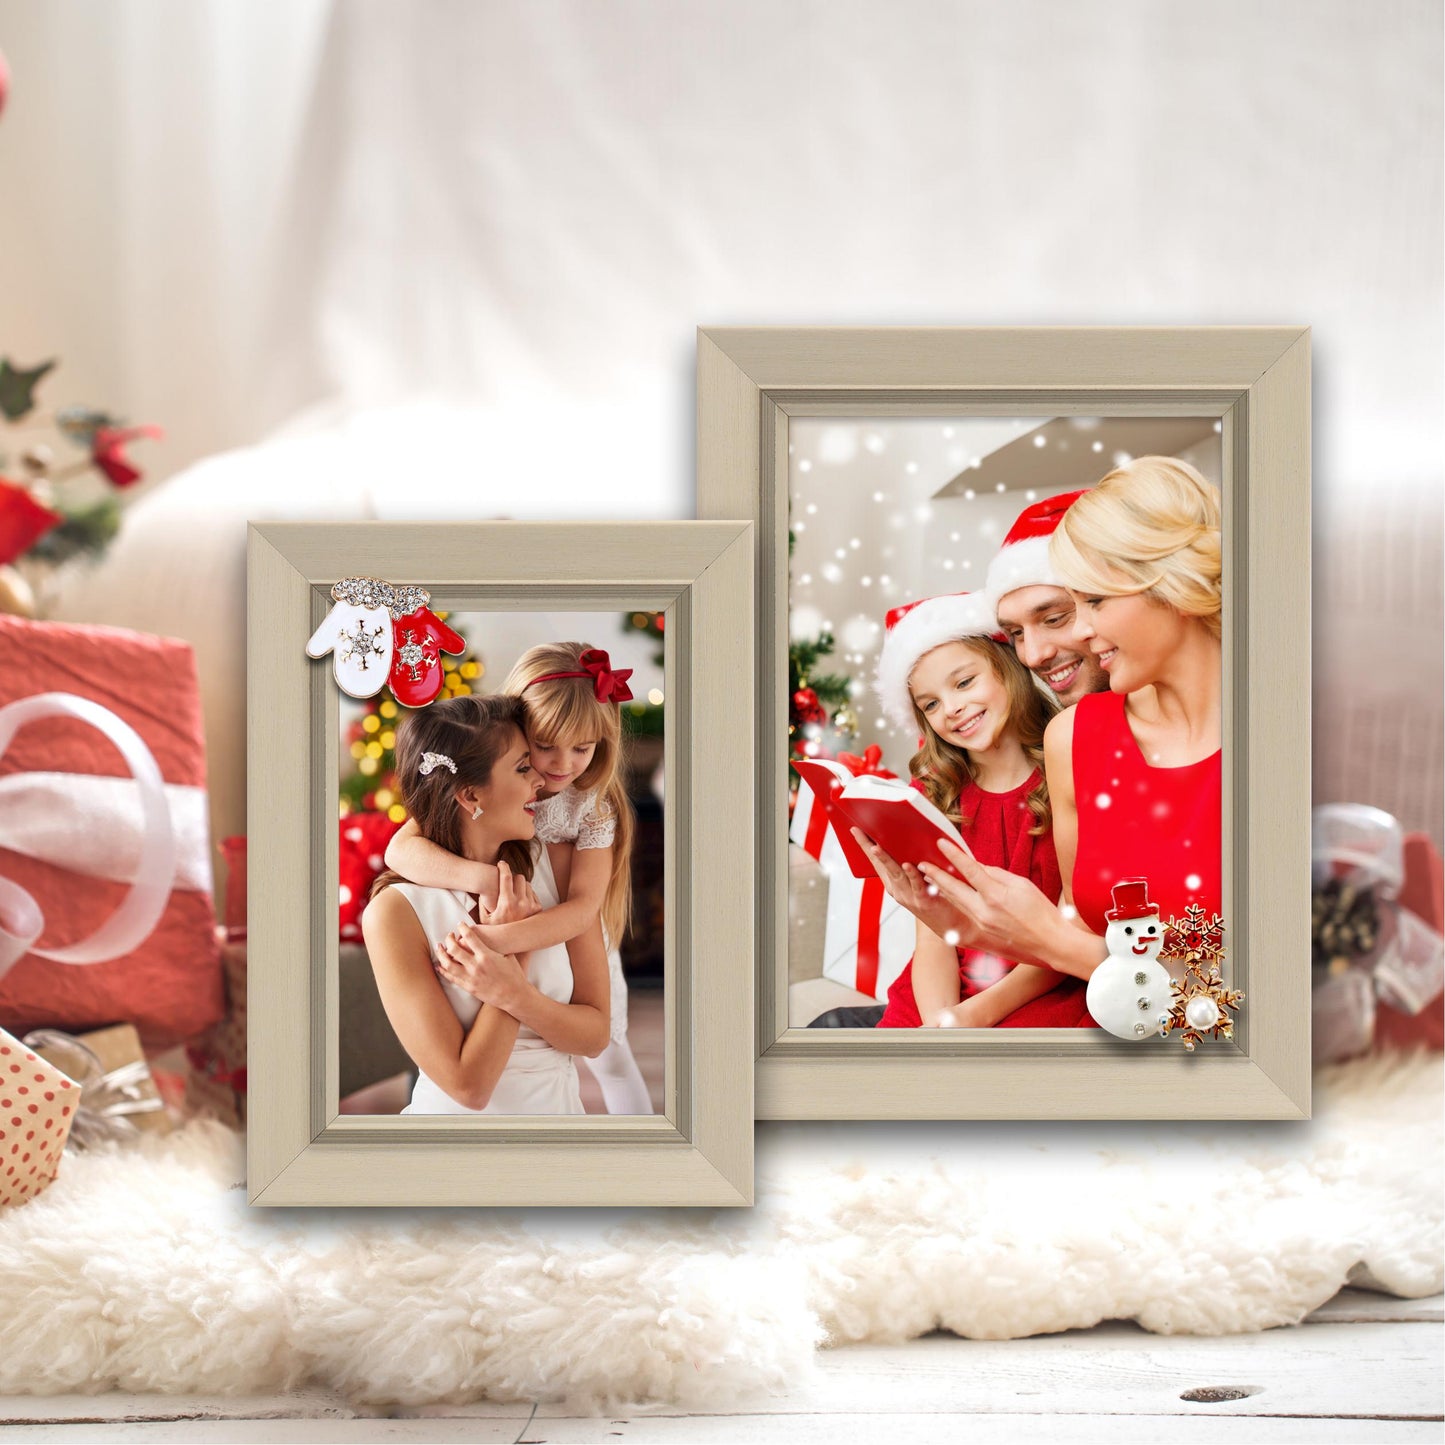 Christmas Picture Frame Photo Frame Embellished Gift for Wall and Tabletop Display (5x7 and 4x6, Beige)